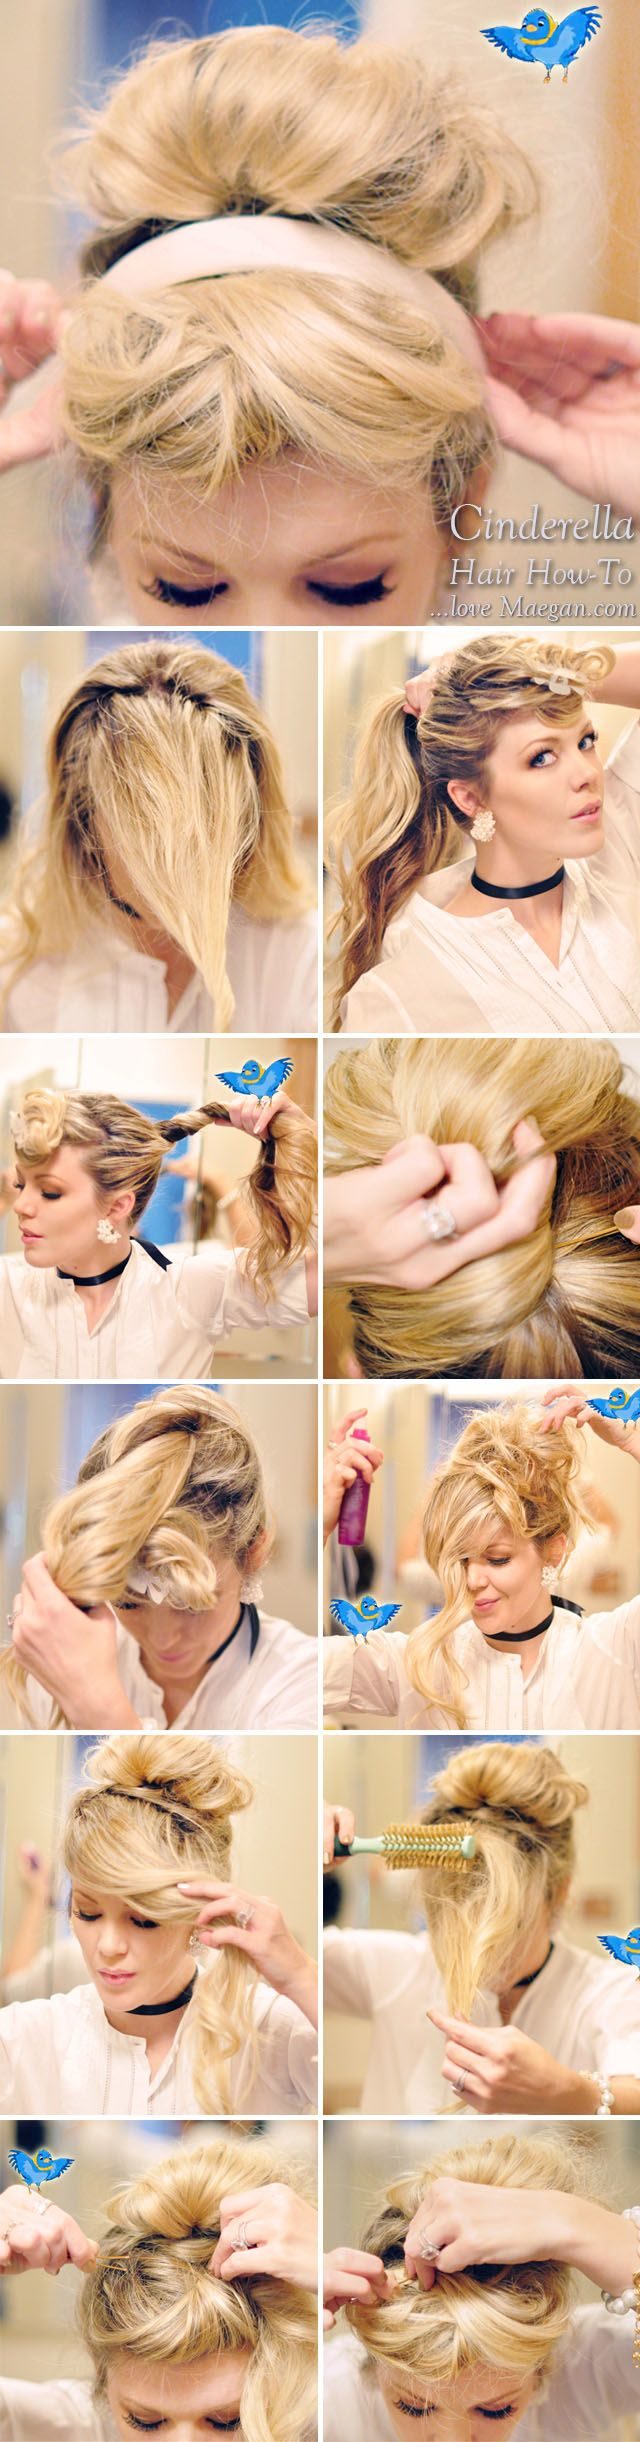 cinderella-hair-how-to-1